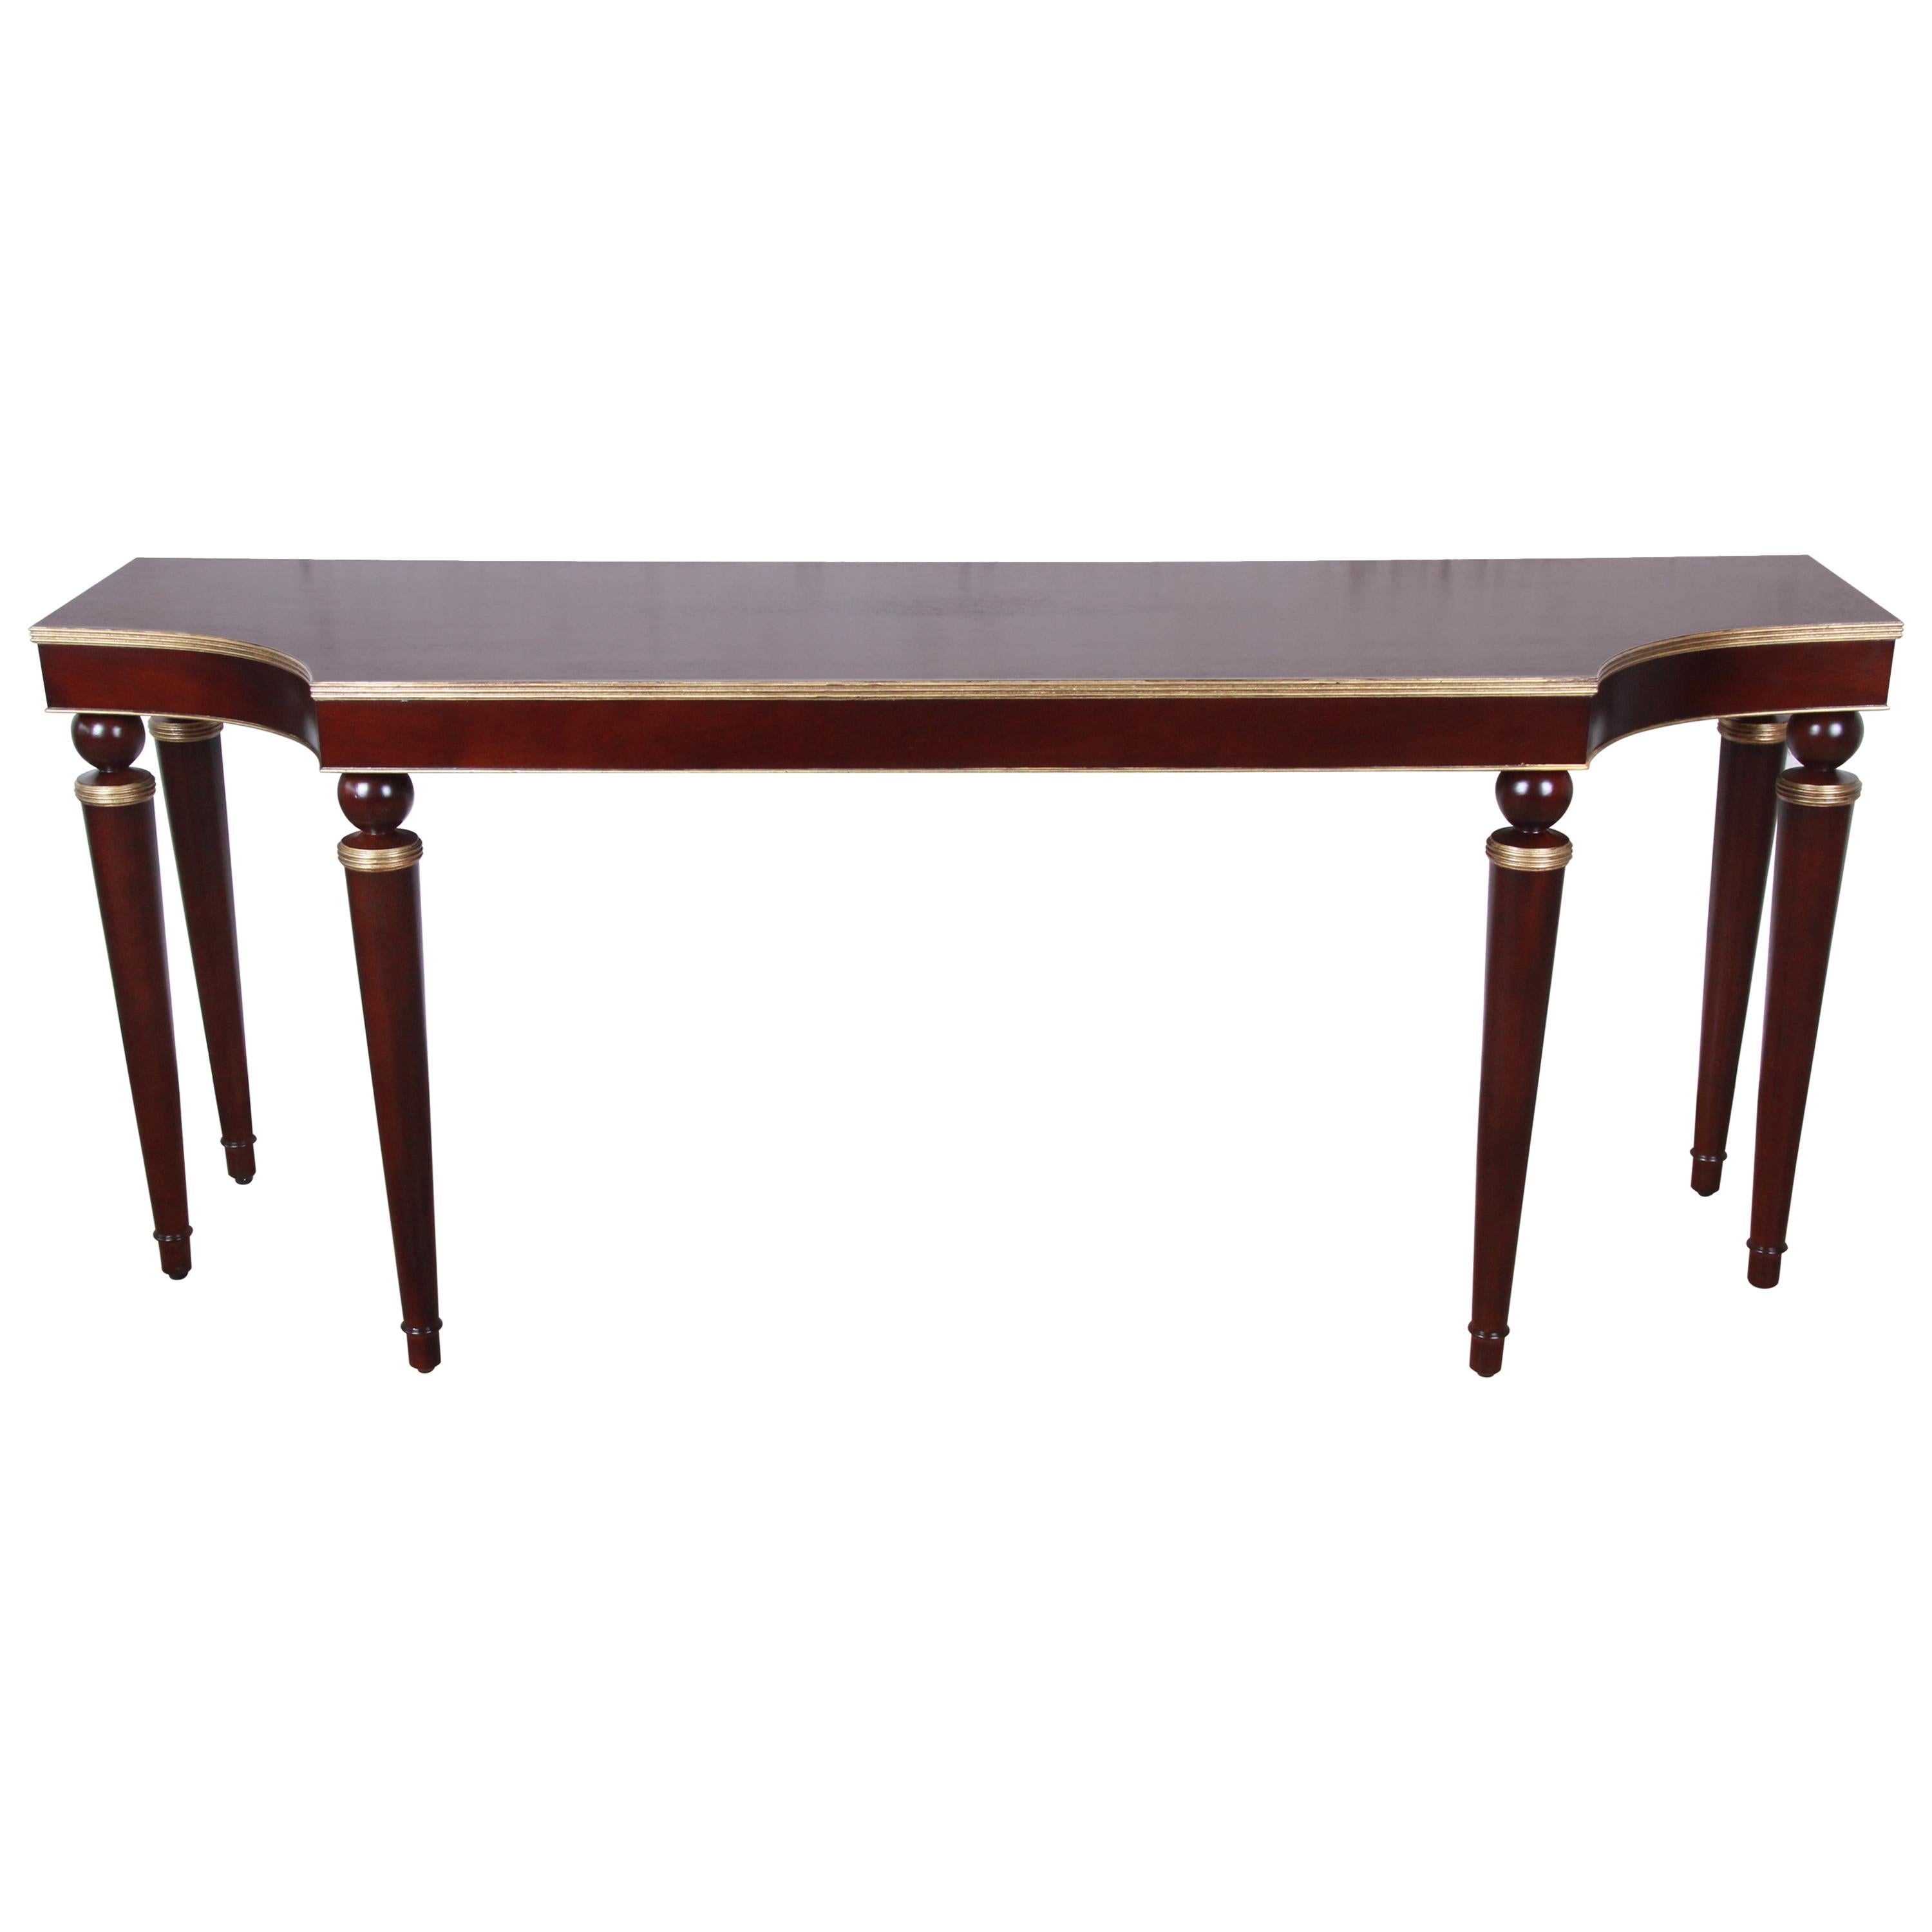 Barbara Barry for Baker Mahogany and Gold Gilt Console or Sofa Table, Restored